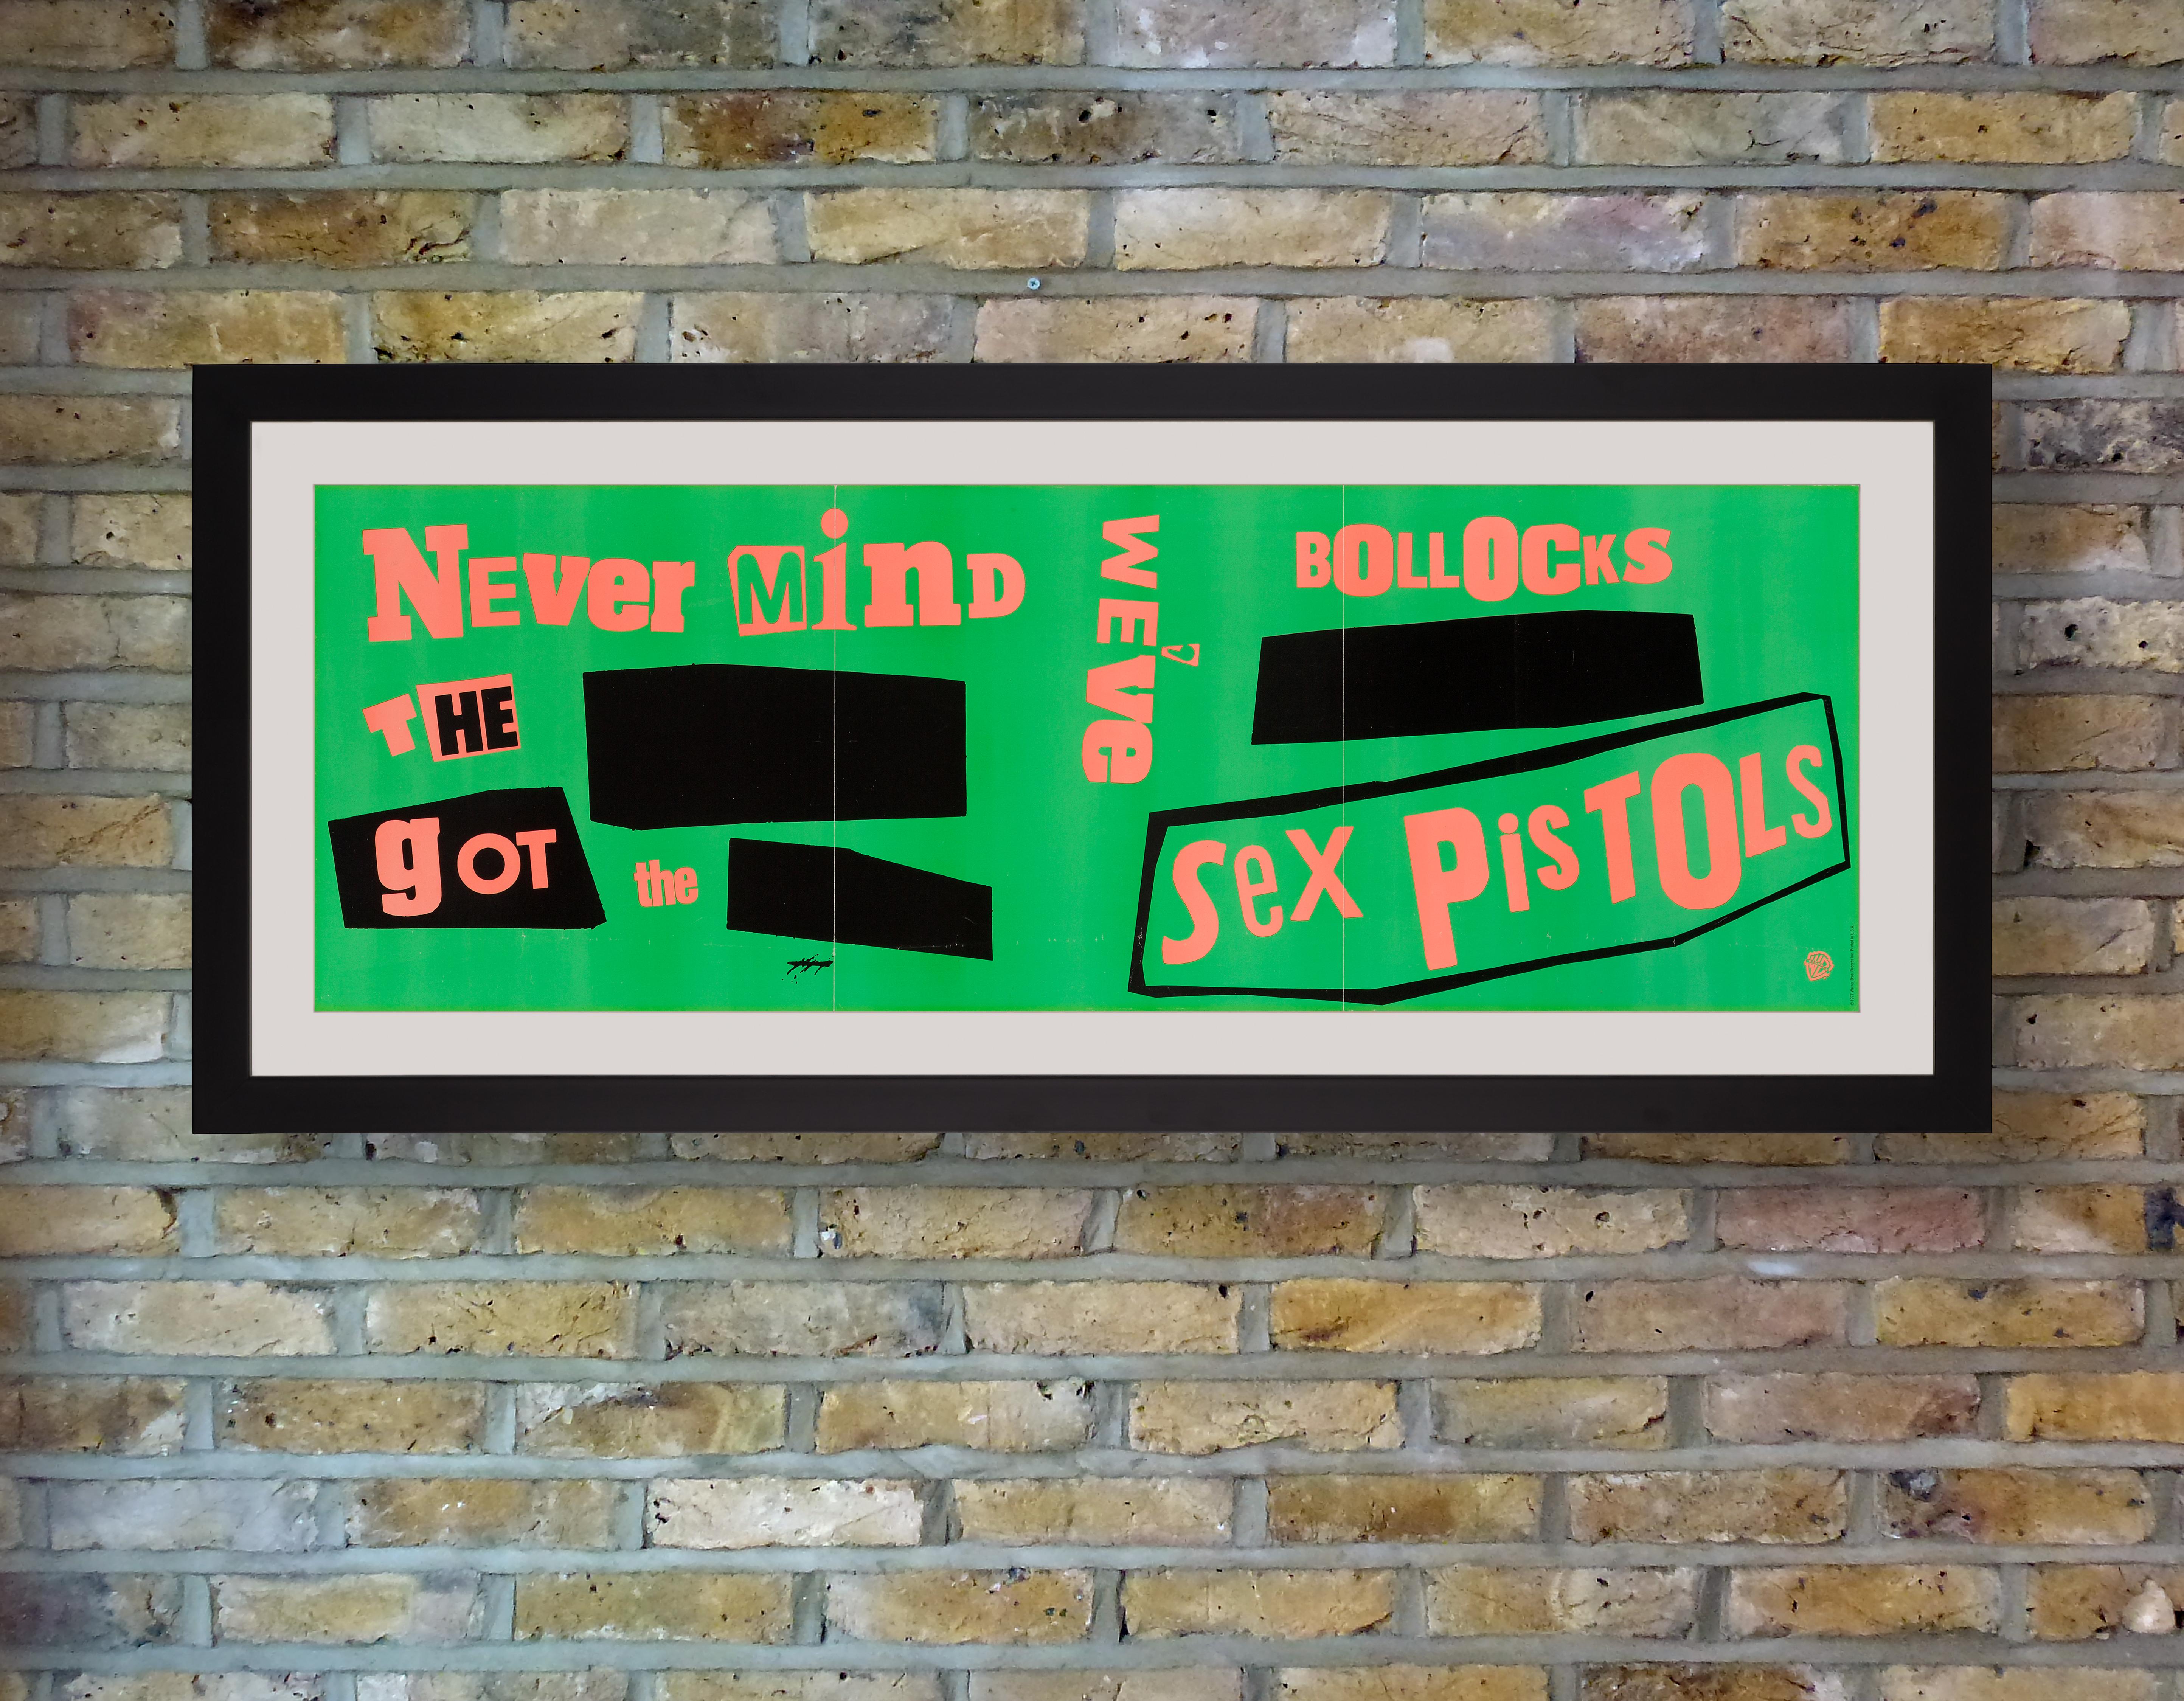 A promotional banner poster printed by Warner Bros to promote the November 1977 US release of the Sex Pistols only studio album 'Never Mind The Bollocks, Here's the Sex Pistols' in record stores. Despite the enduring controversy that surrounded the